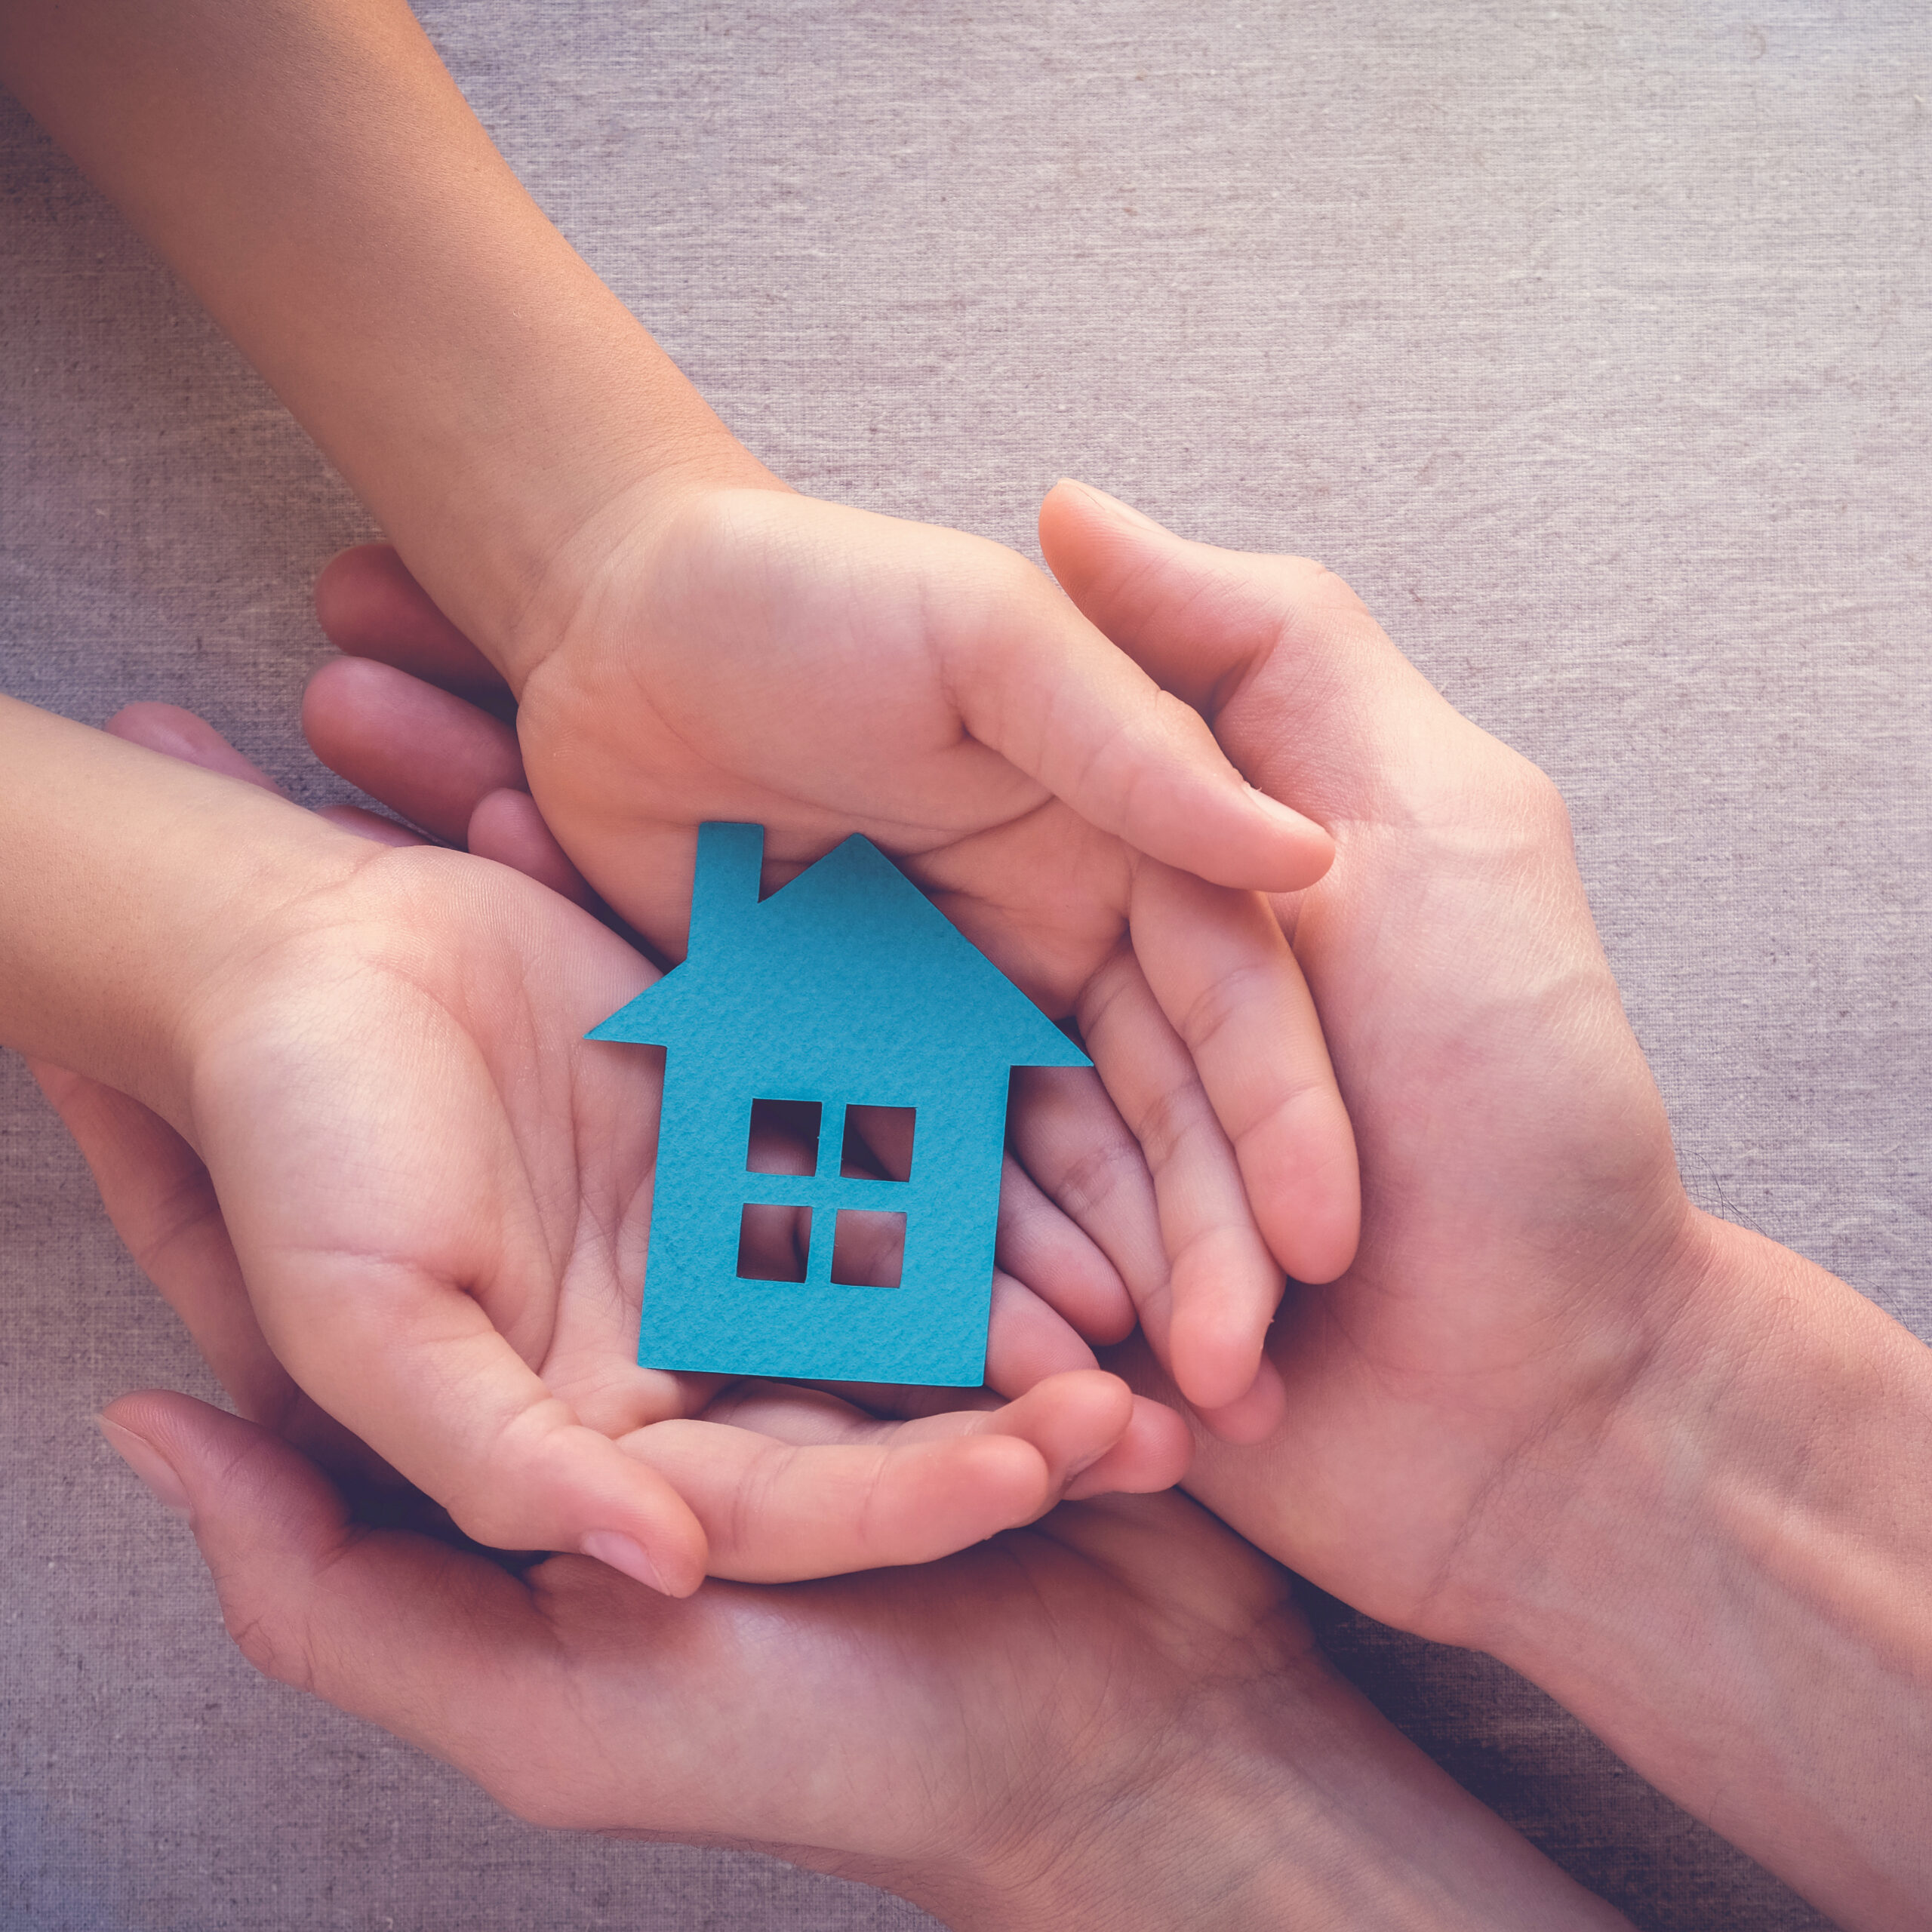 Adult and child hands holding paper house, family home, homeless shelter and real estate concept